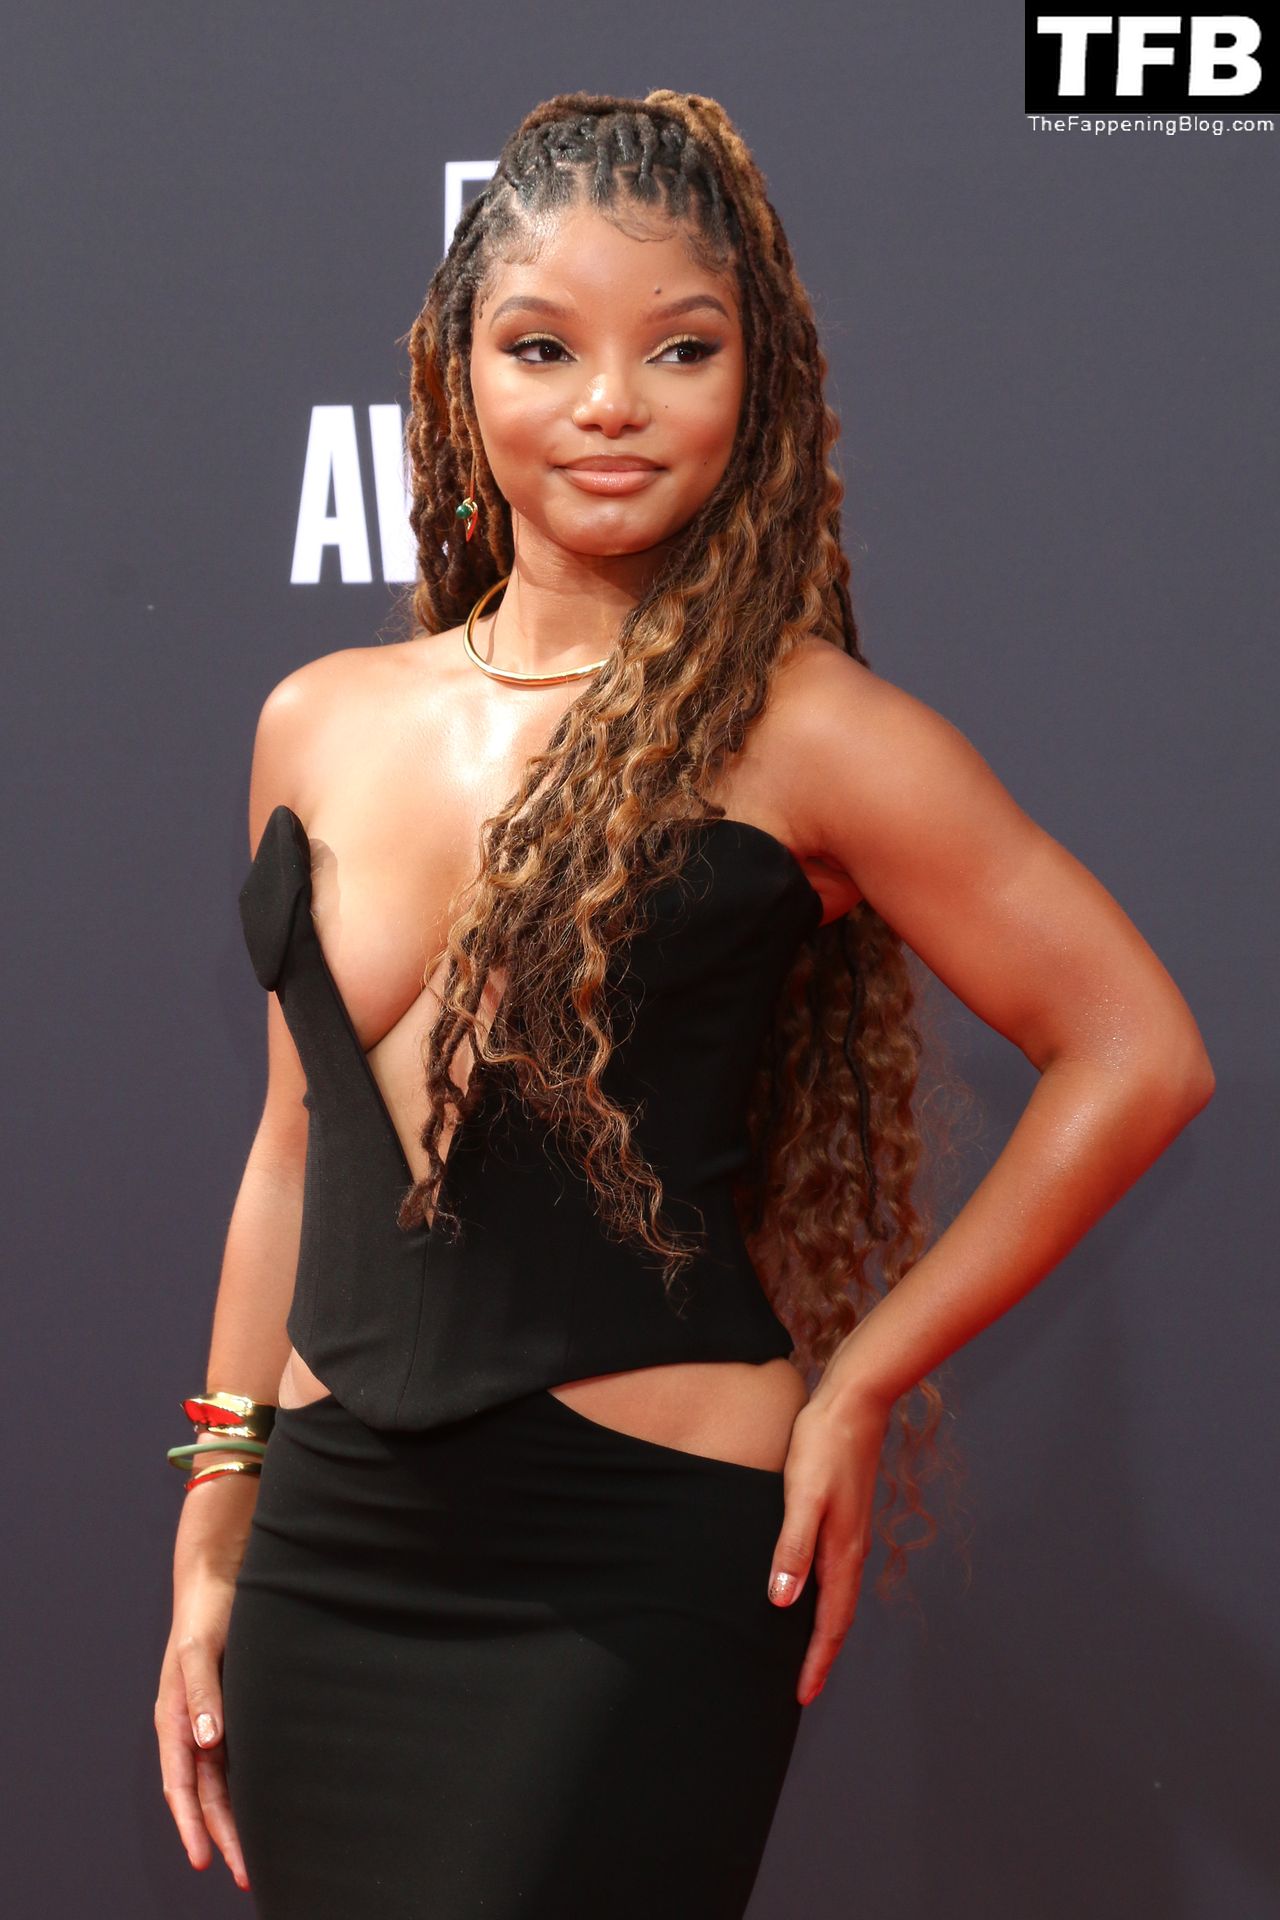 Halle-Bailey-Sexy-The-Fappening-Blog-23.jpg